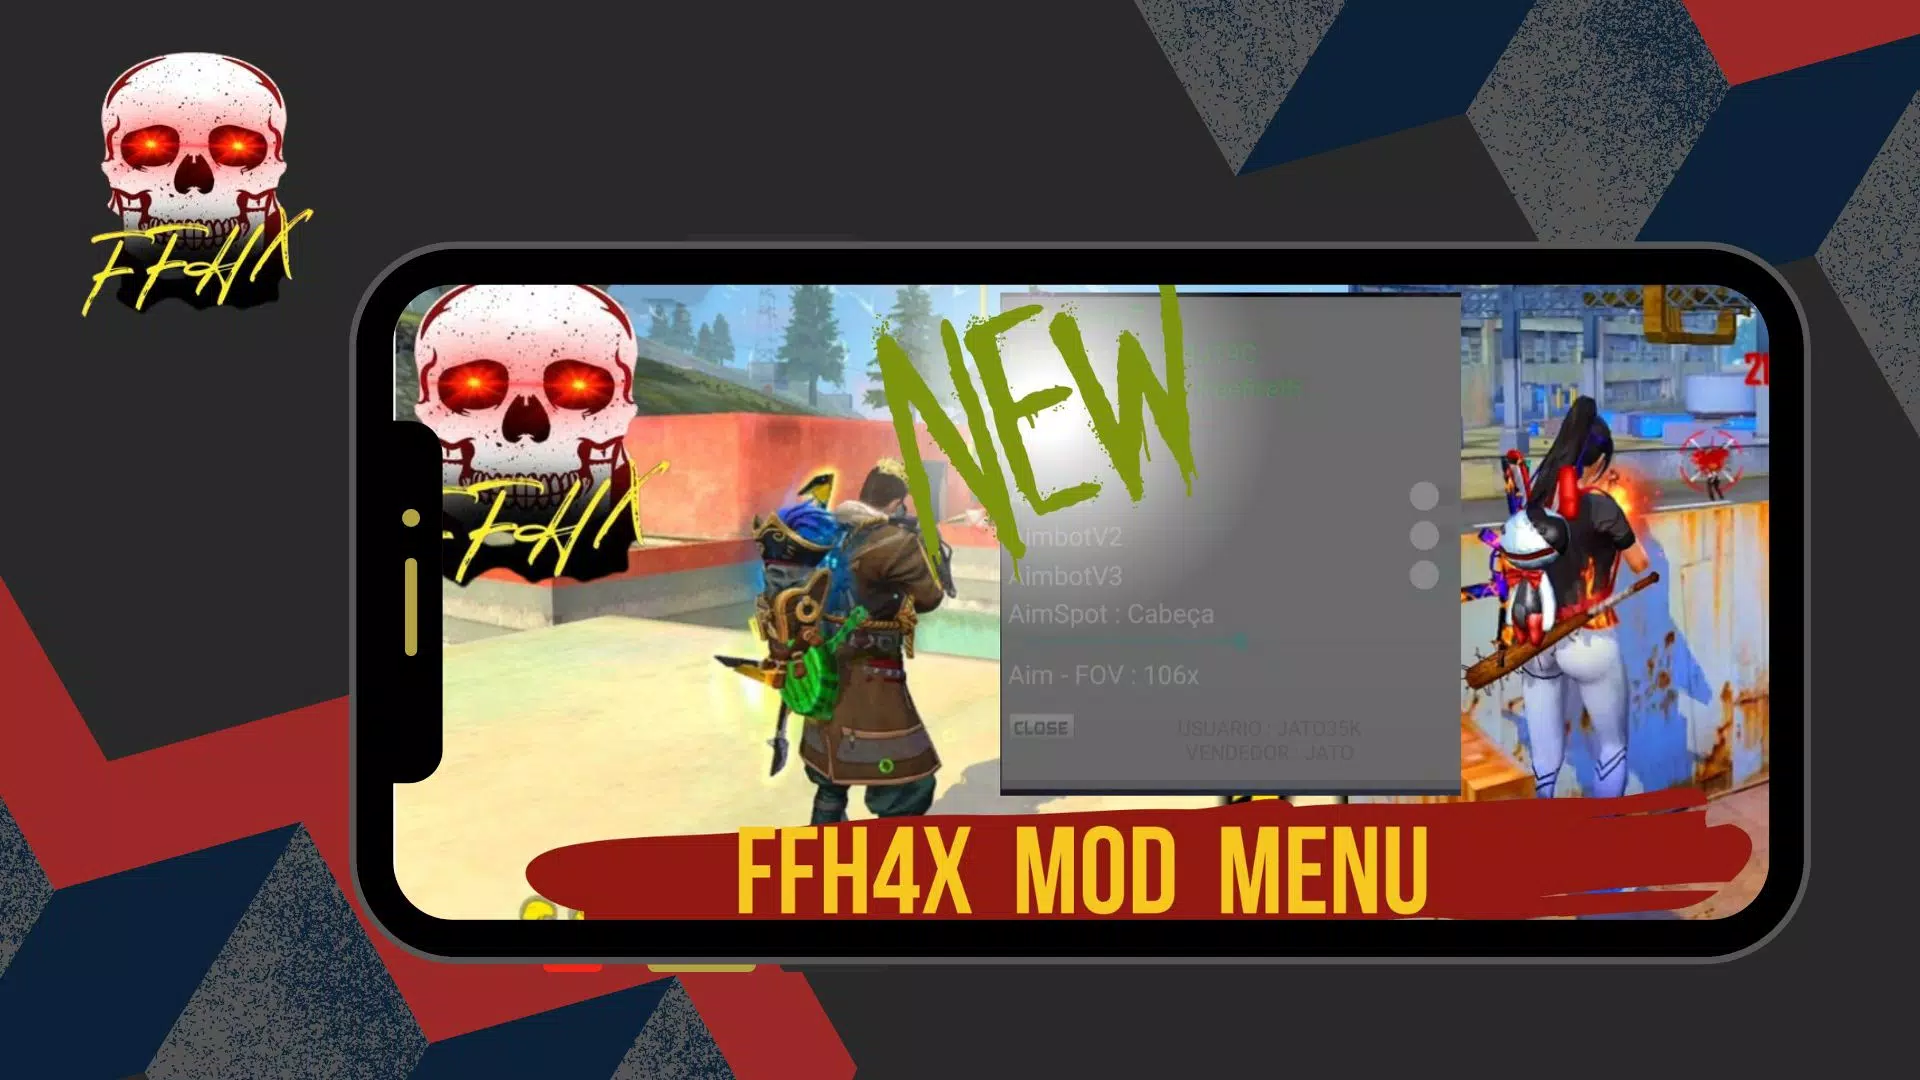 Play ffh4x mod menu for fire Online for Free on PC & Mobile